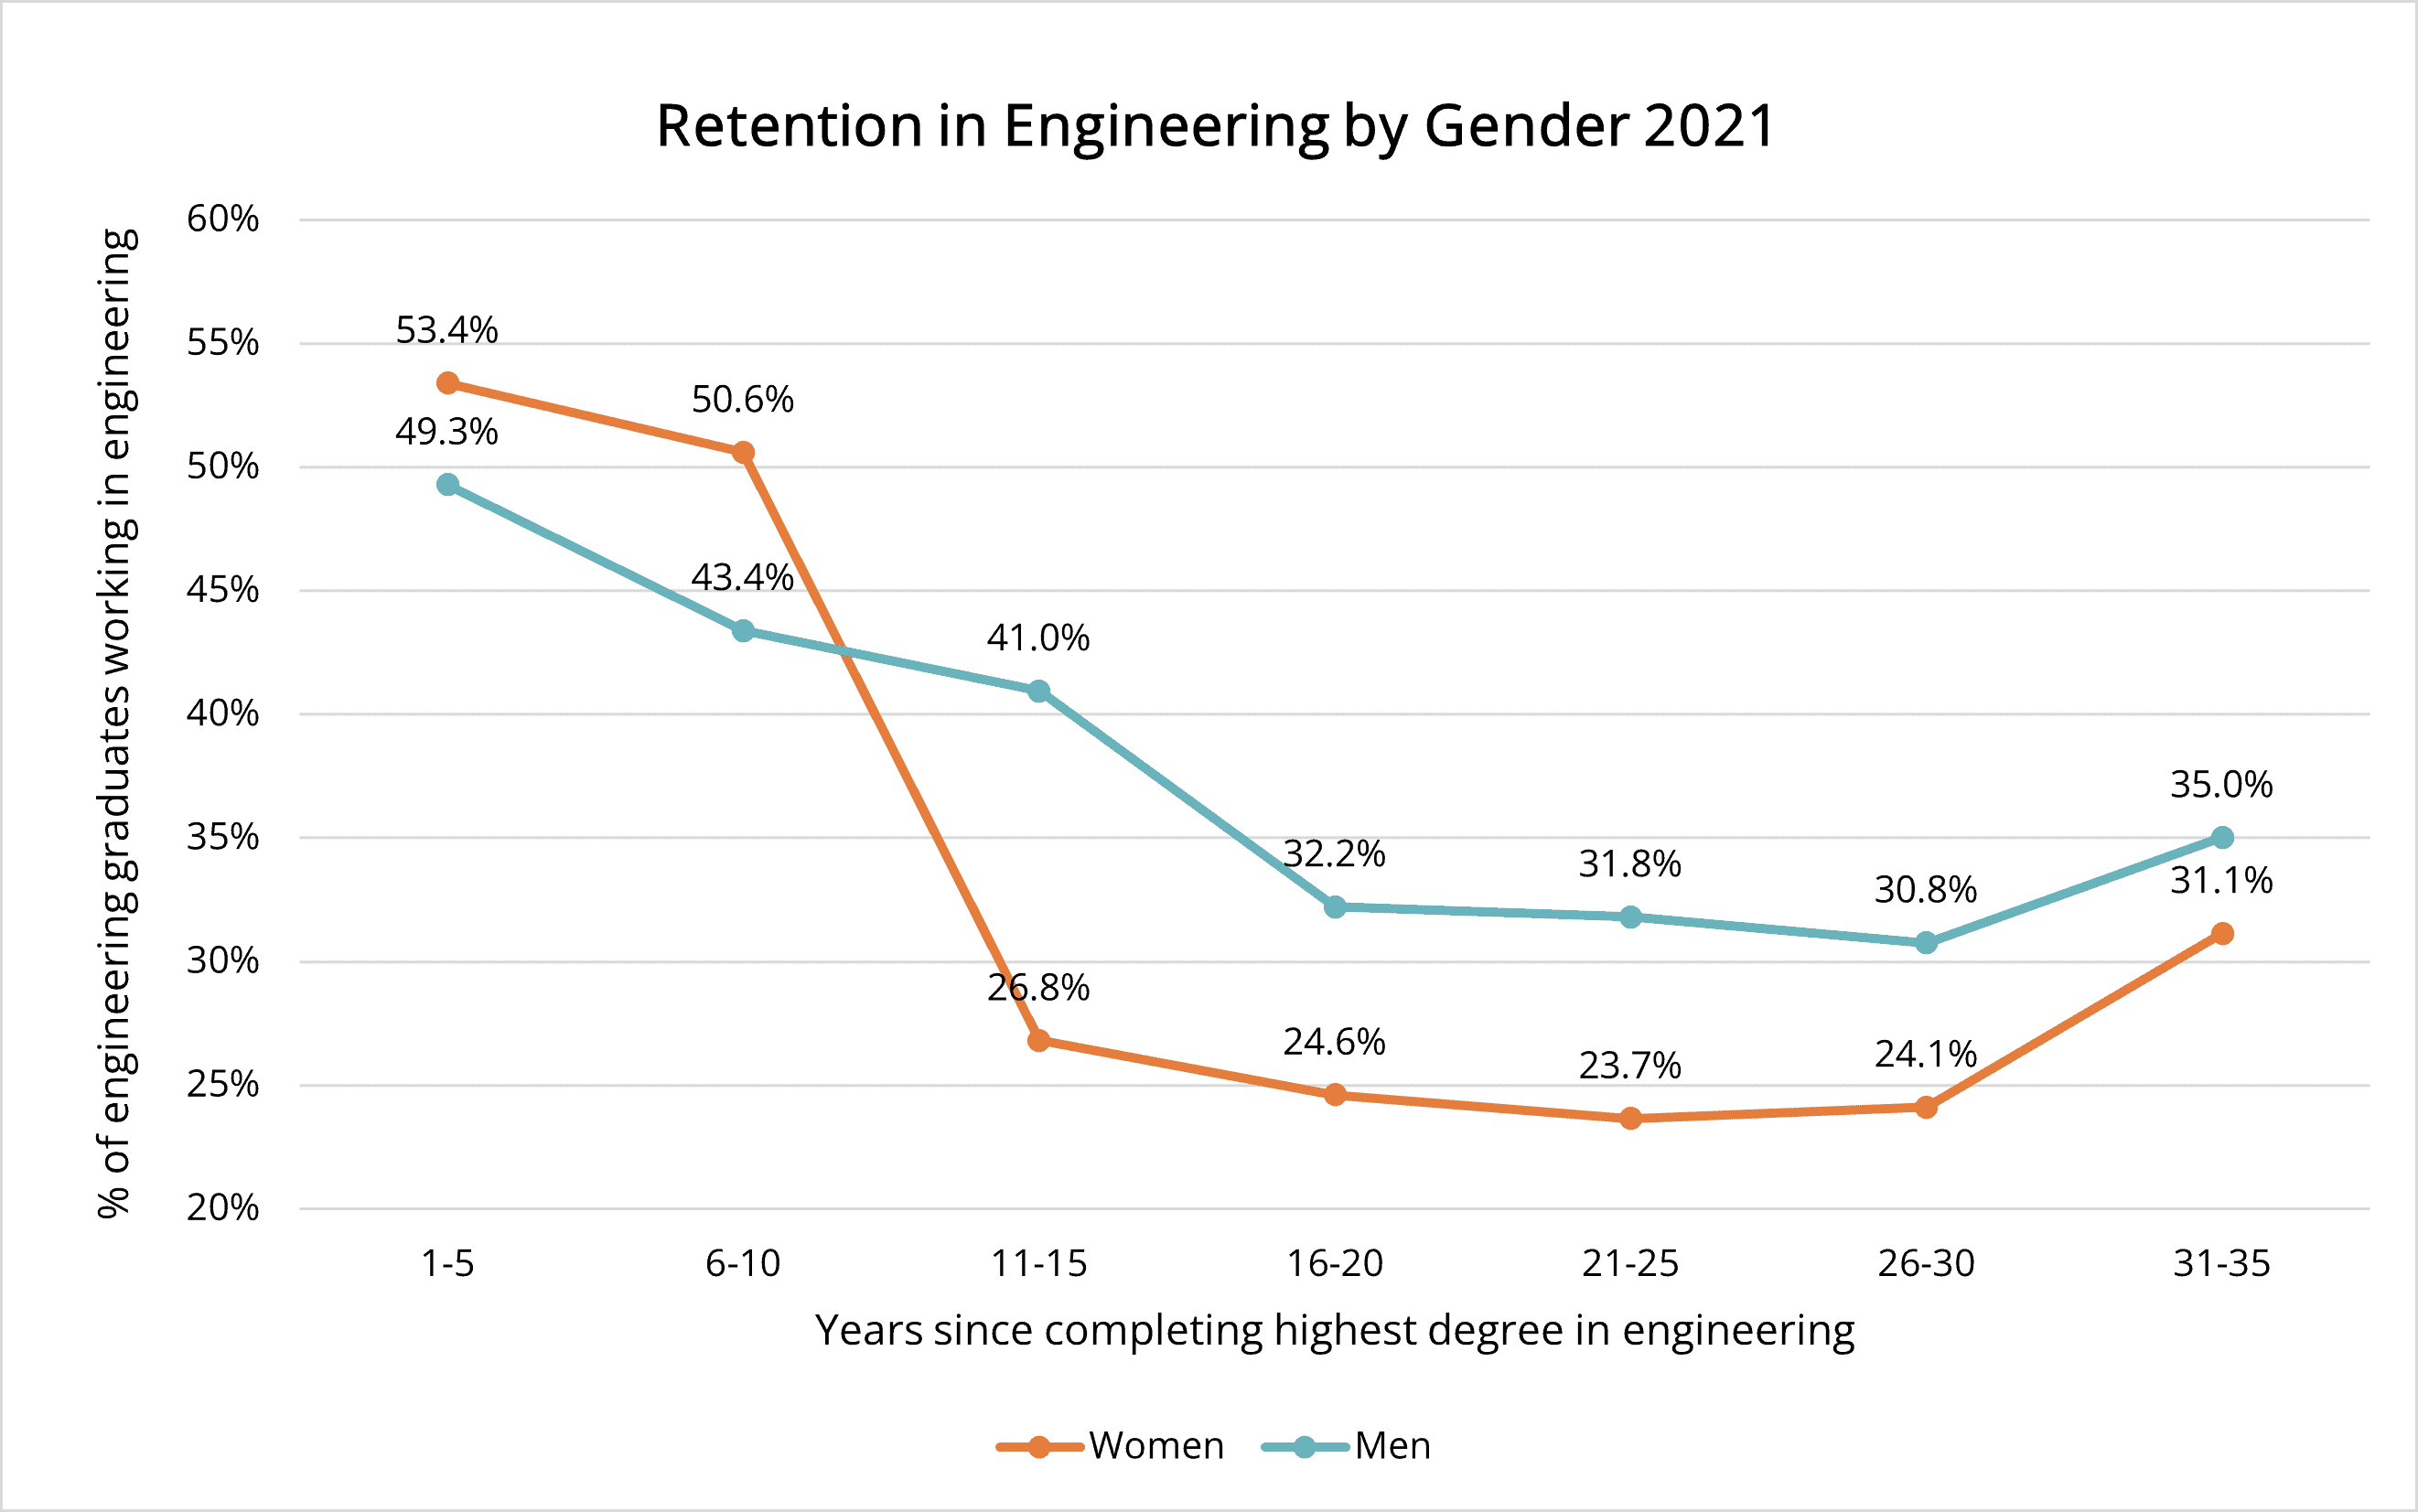 Line graph comparing percentages of retention of men and women in engineering